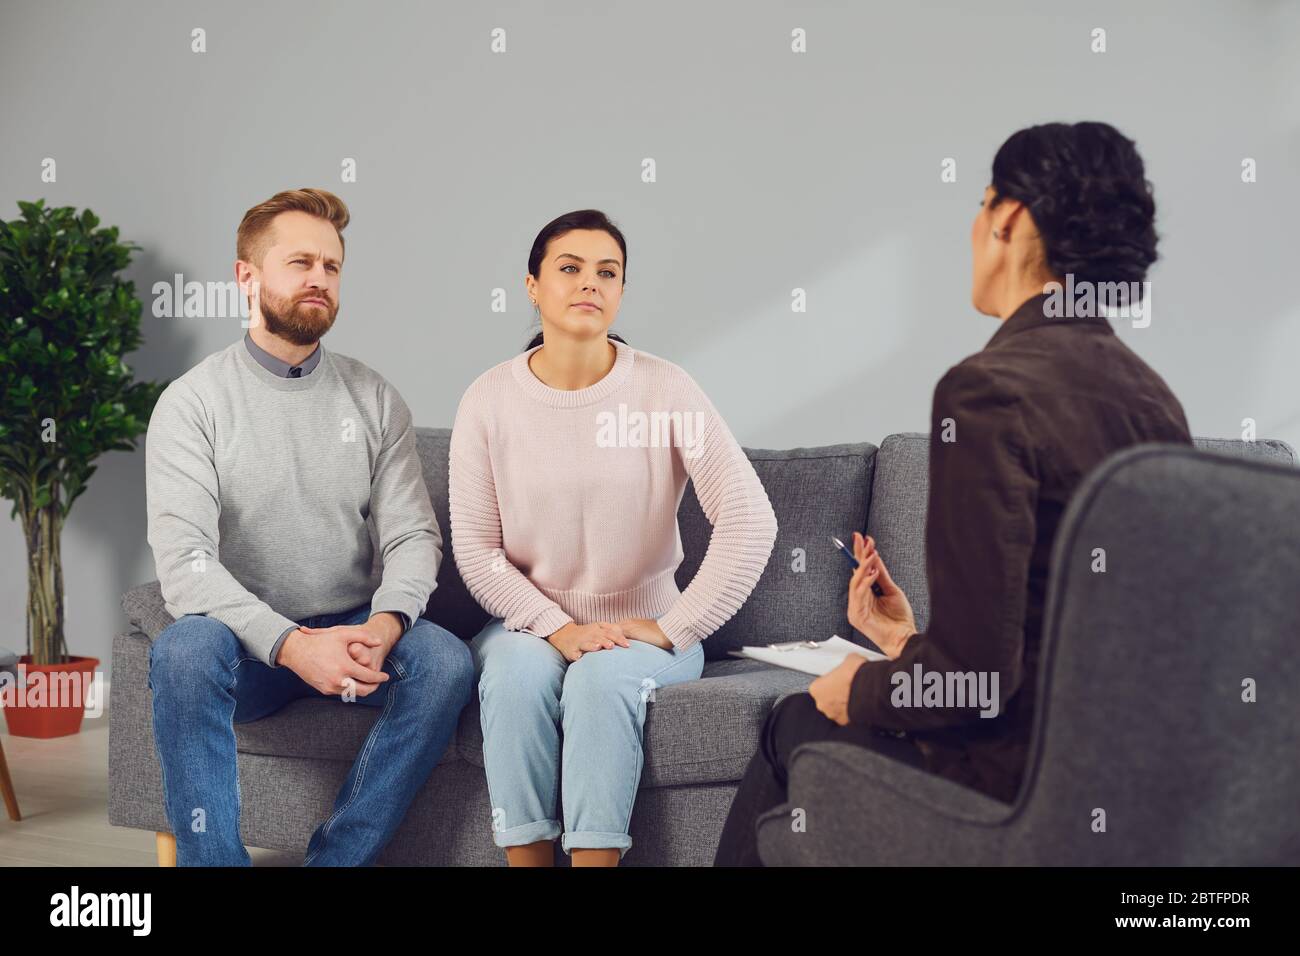 Family psychologist. Female psychologist at a psychotherapy session with family in the office. Stock Photo